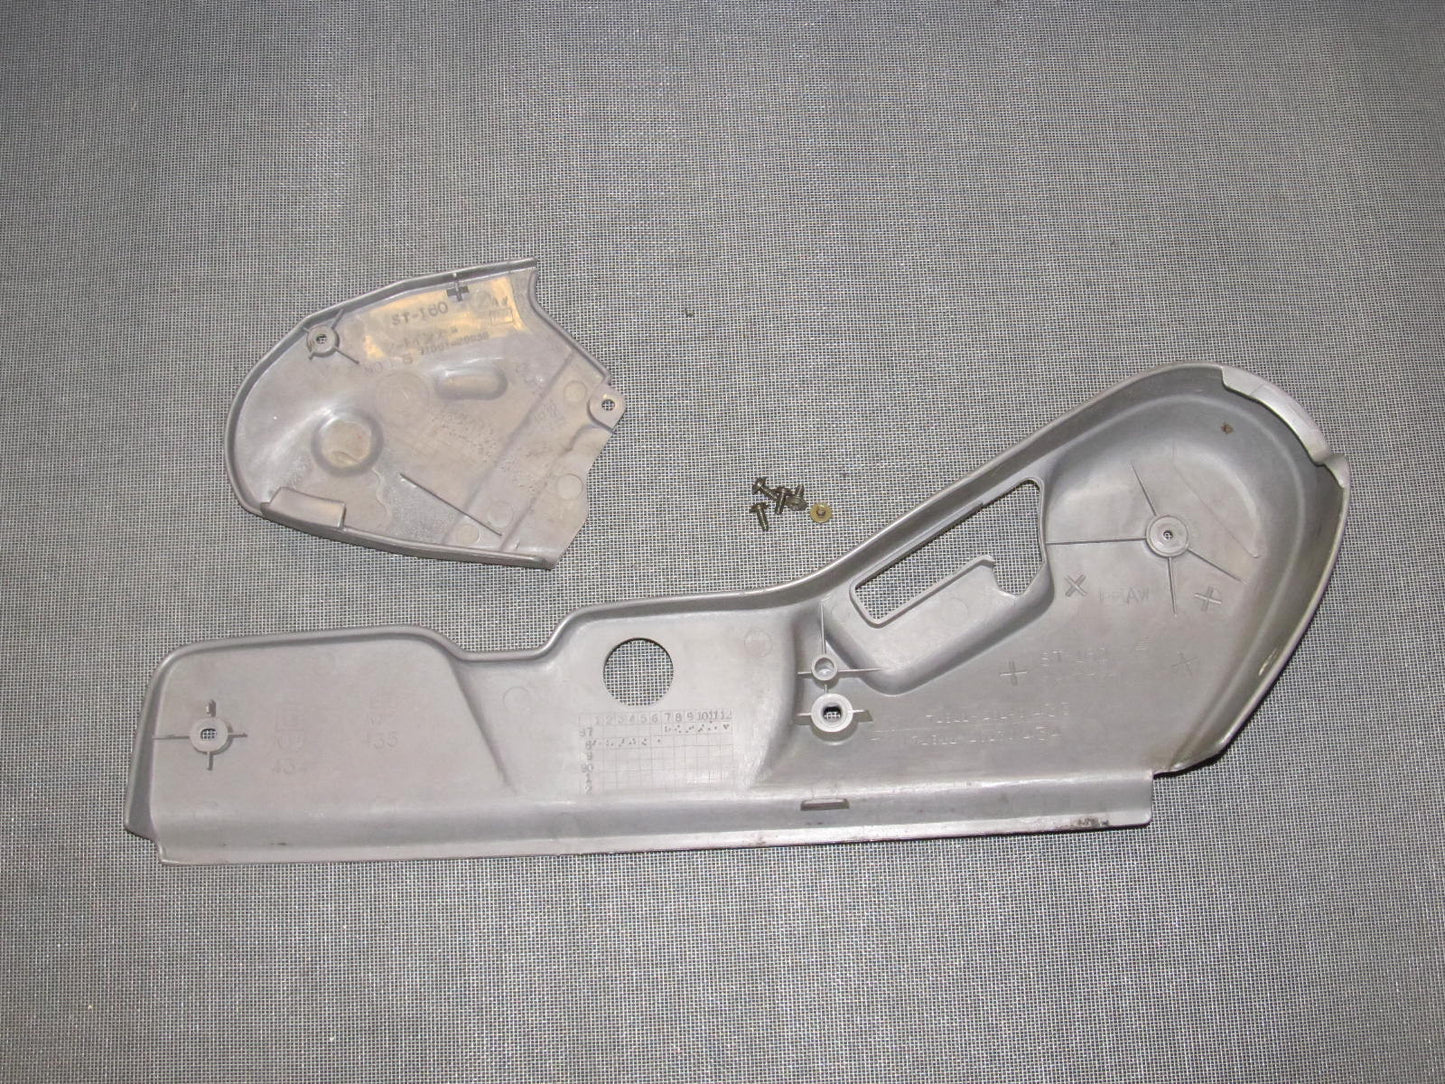 86 87 88 Toyota Supra Brake OEM Seat Panel Cover - Front Right